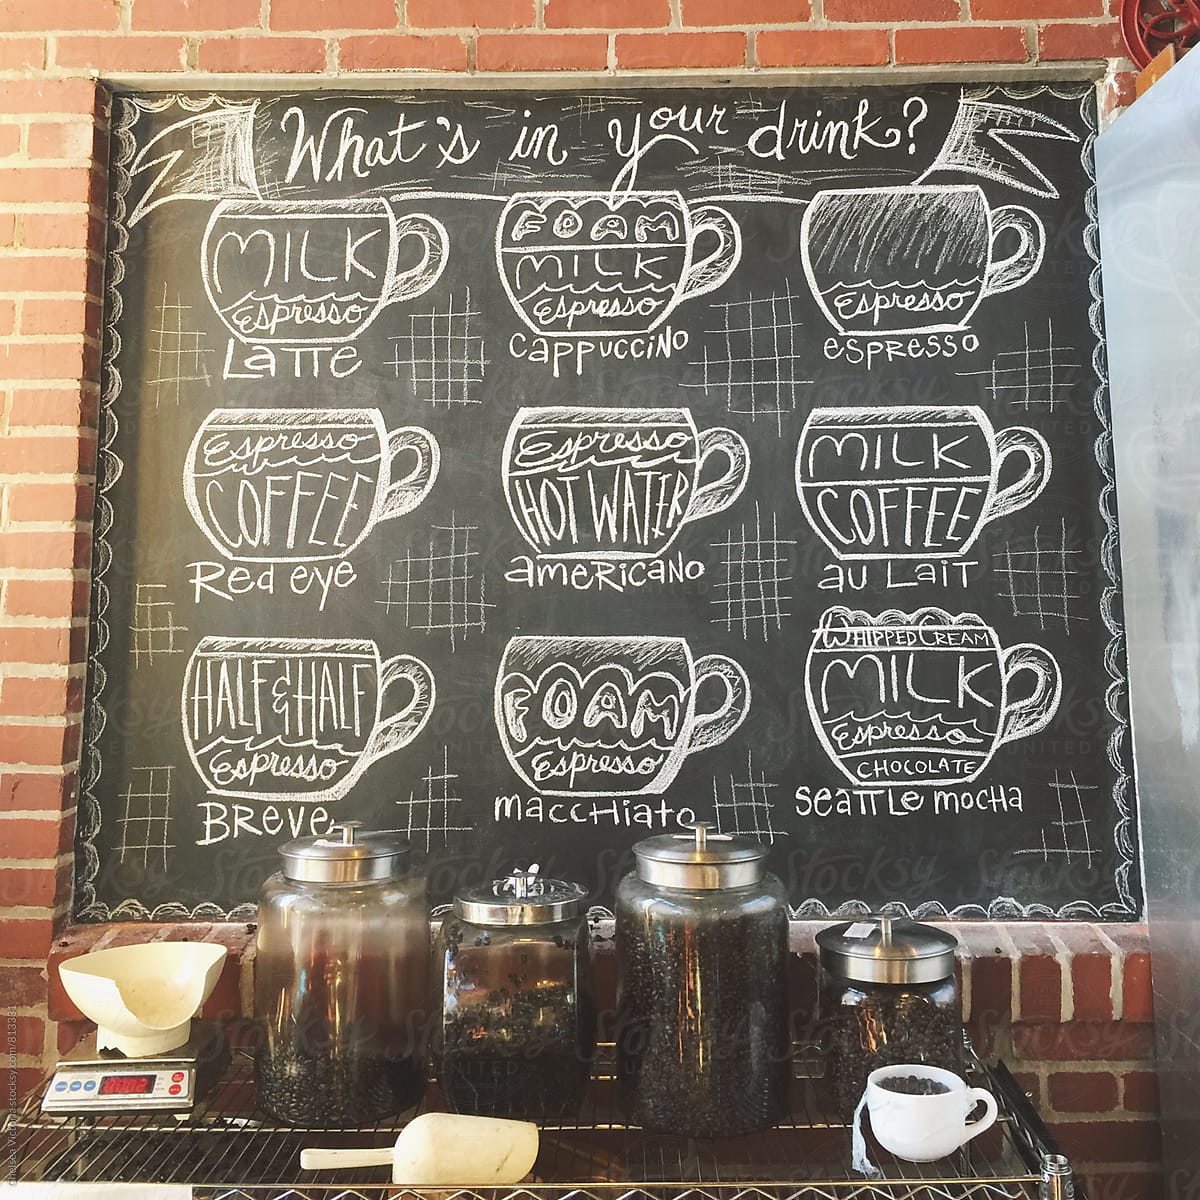 Different kinds of coffee at a cafe